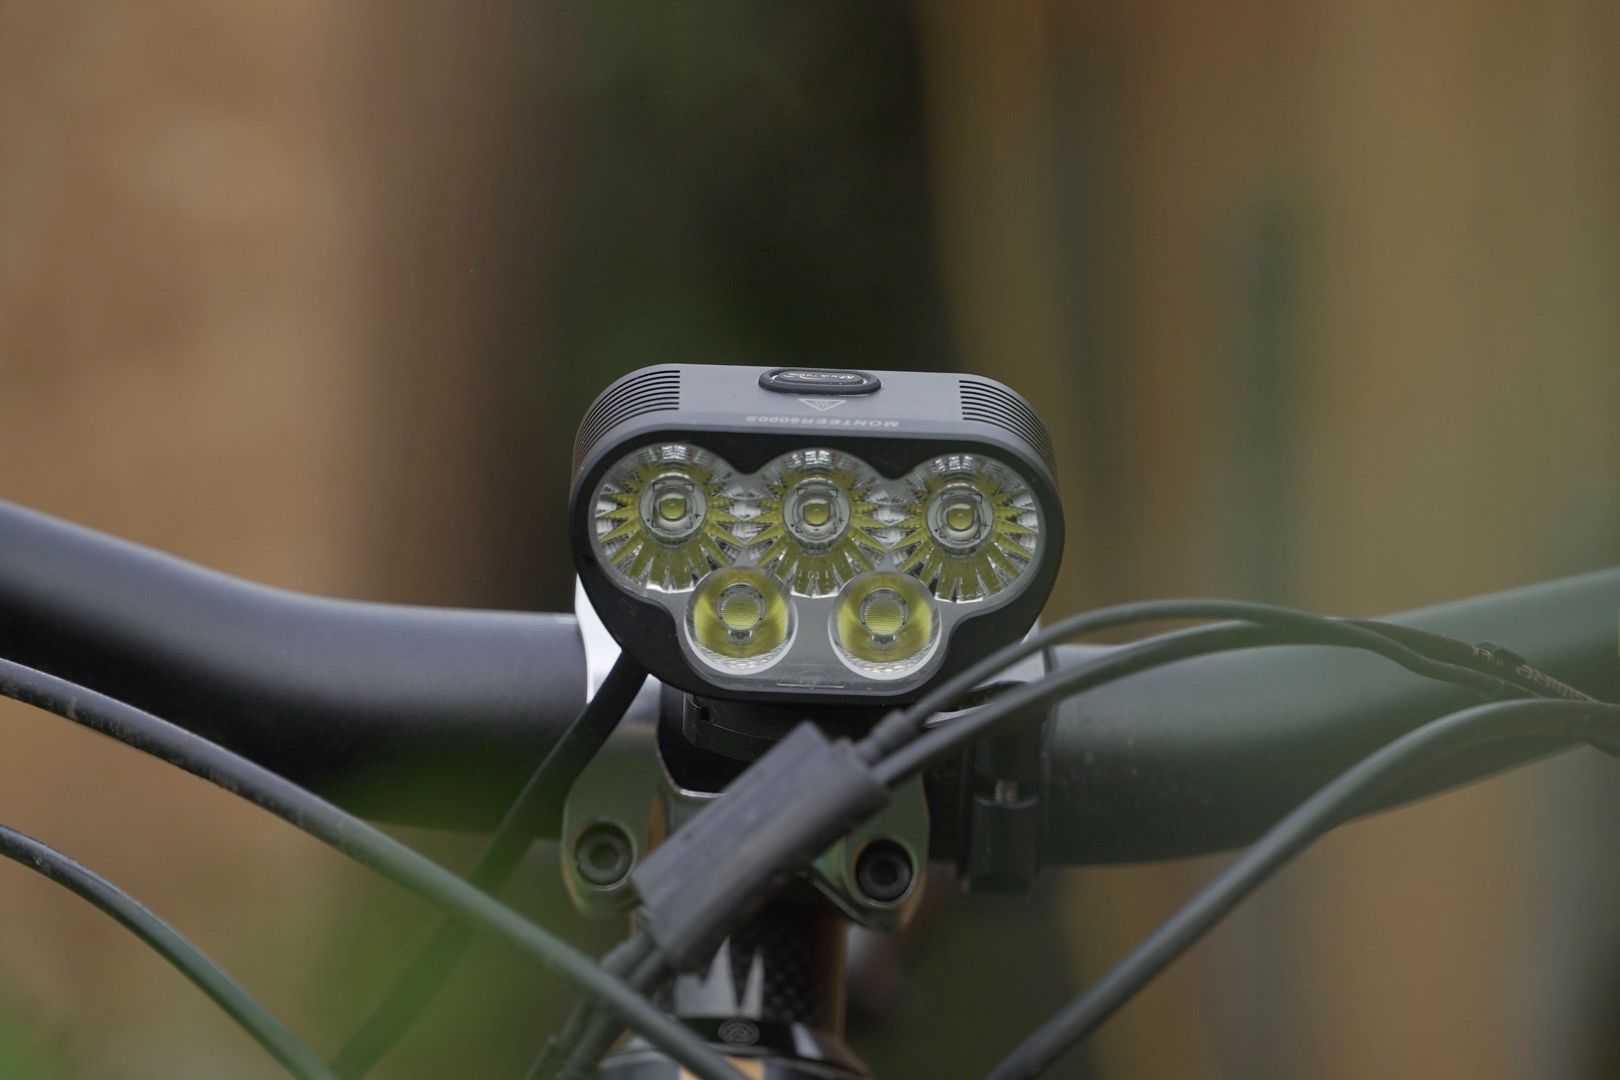 8000 Lumens with a wireless control - Magicshine Monteer 8000S V2 Mountain  Bike Headlight Review 